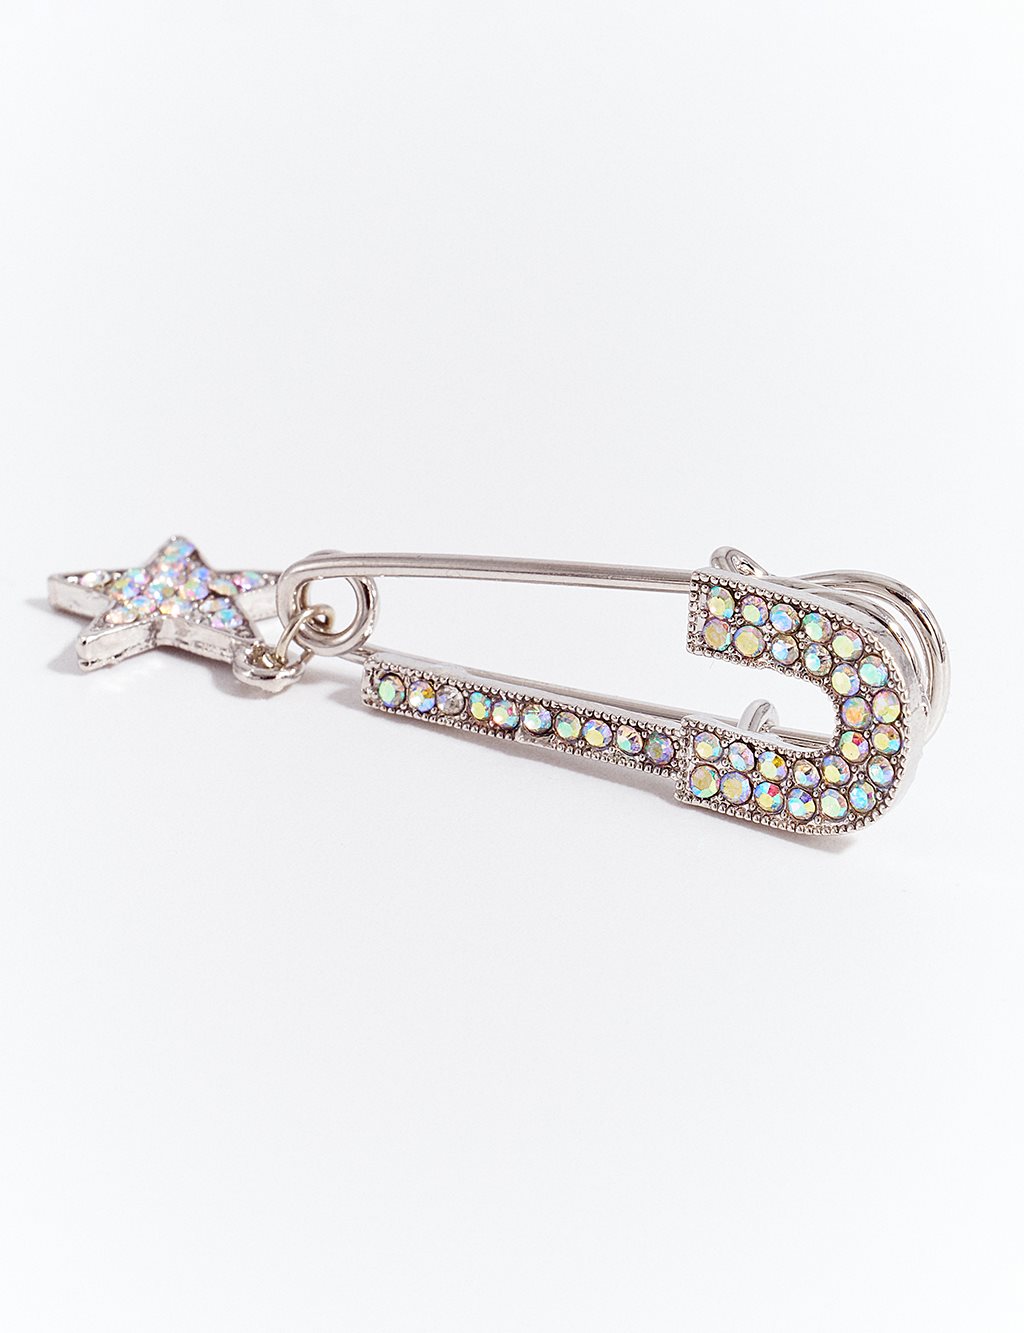 Starry Safety Pin Brooch Silver